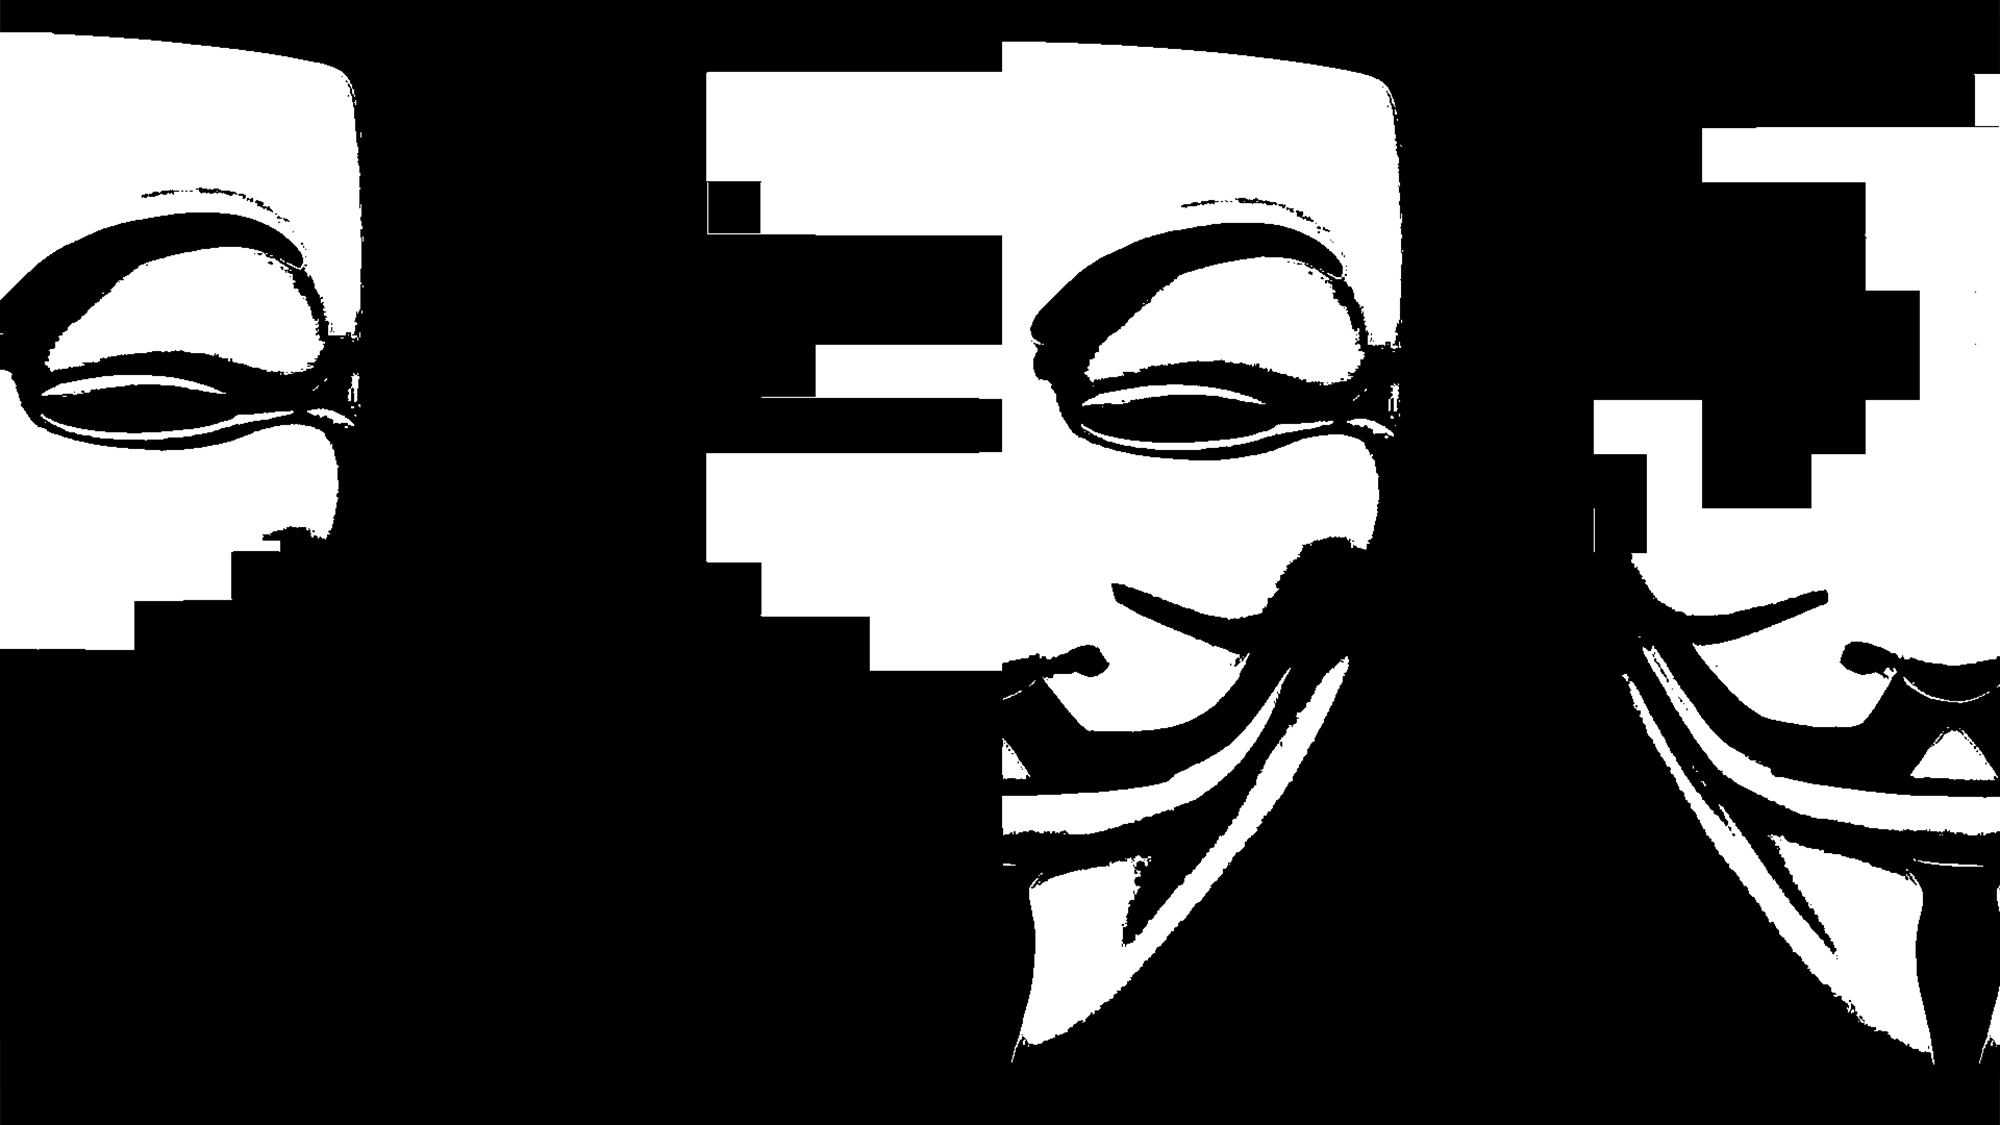 The Hacker Group Anonymous Returns The Atlantic - free roblox hacks 2017 augast unlimited